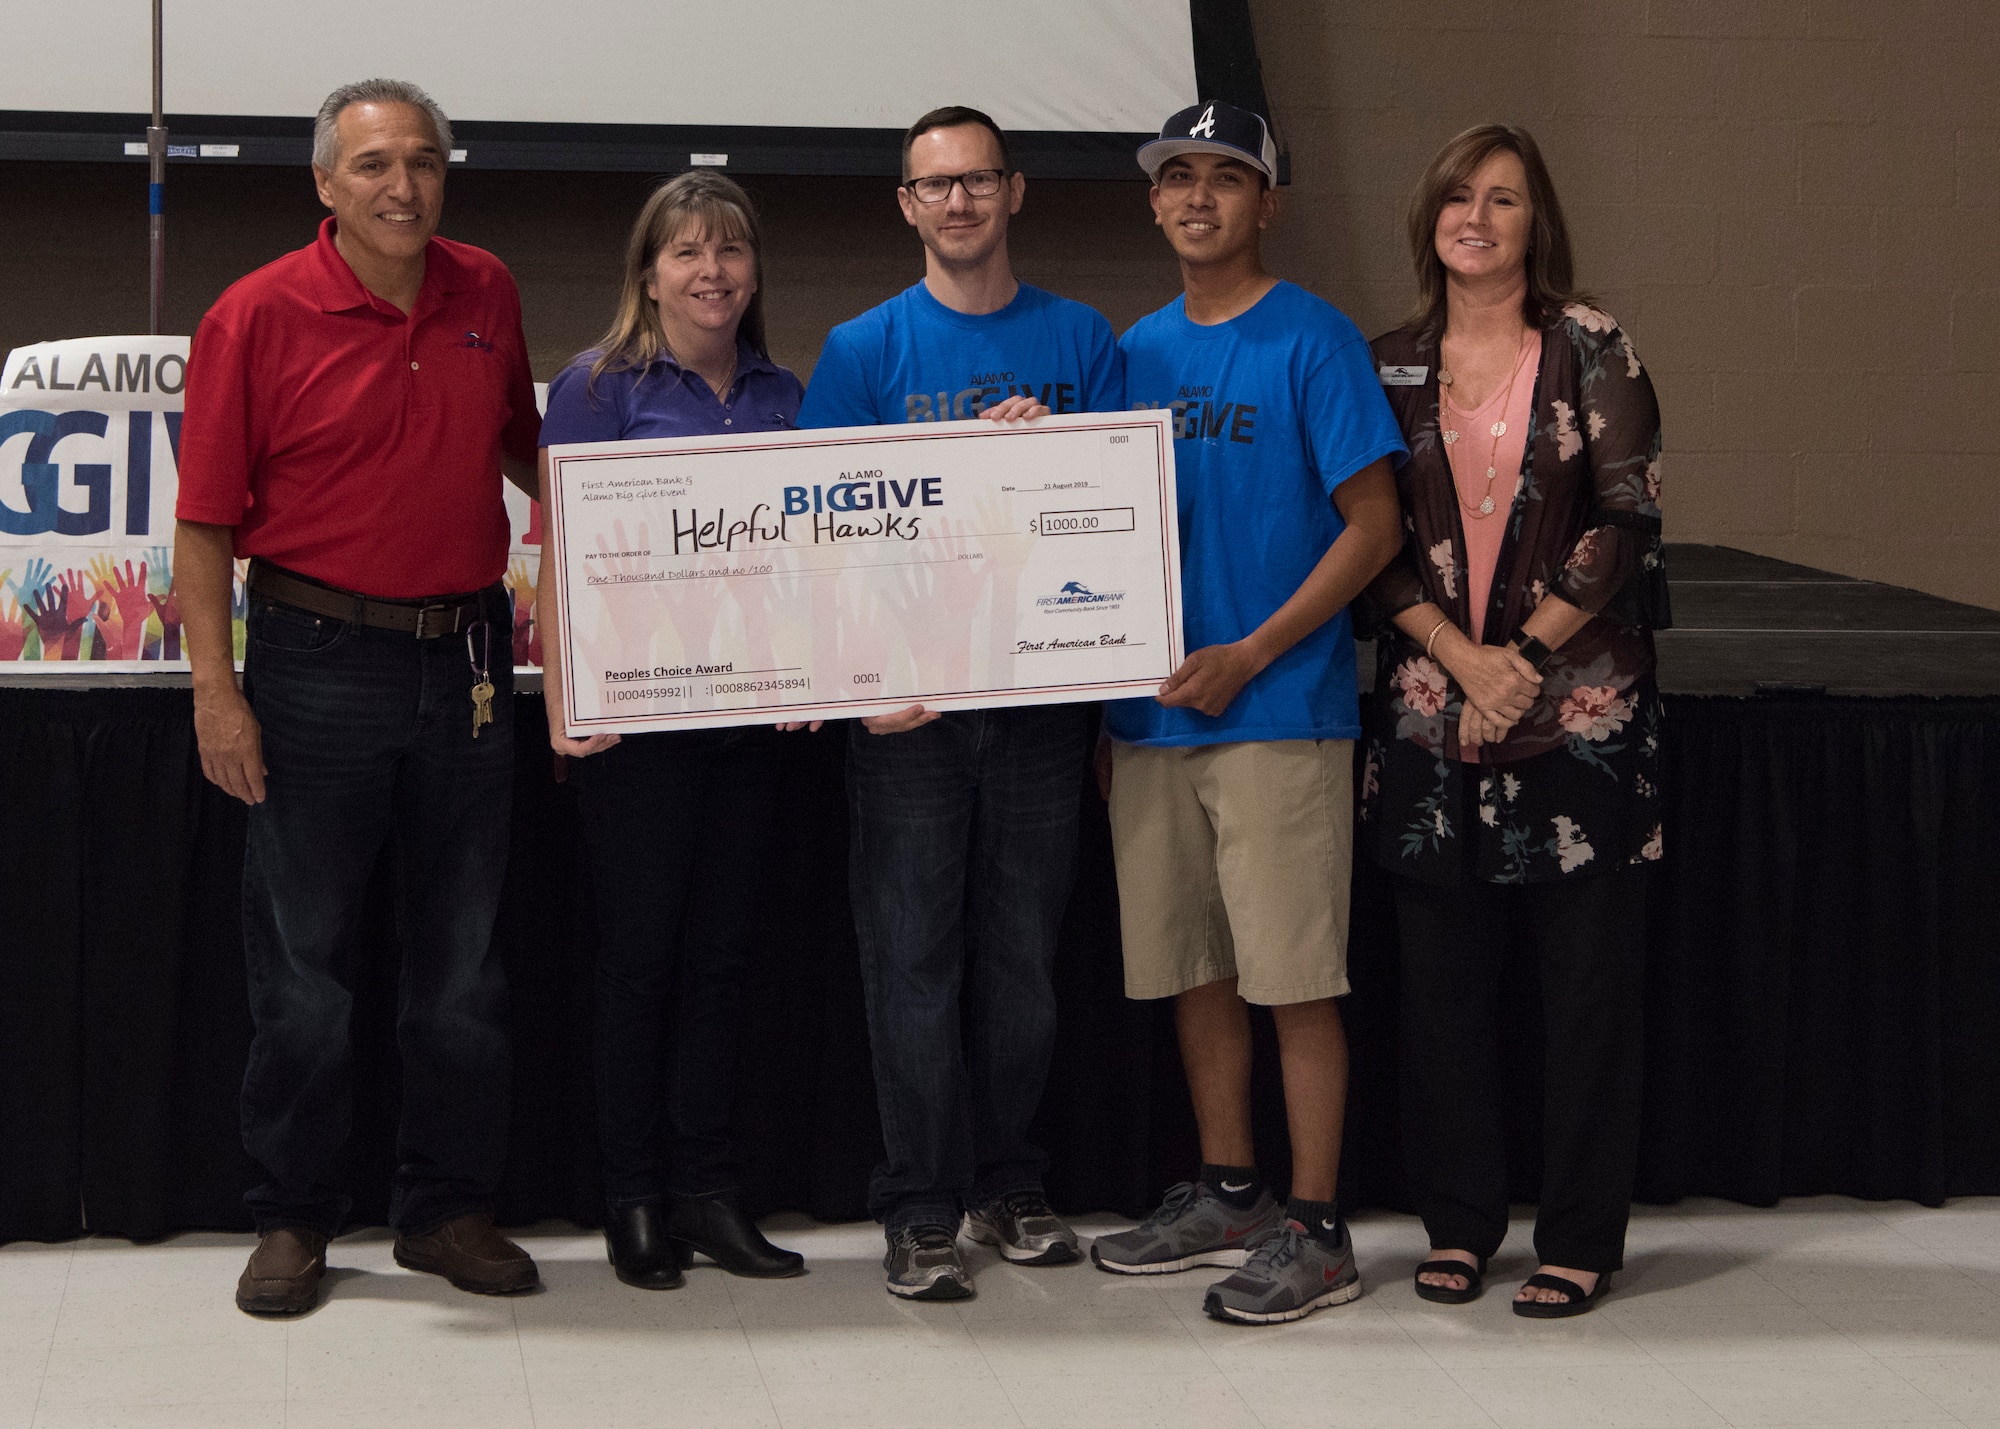 Members of team Helpful Hawks accept a check for winning the people’s choice category as part of the 2019 Alamo’s Big Give closing ceremony, August 22, at the Willie Estrada Civic Center in Alamogordo, N.M. This was the 12th year of Alamo’s Big Give which has saved the Otero community over $2,000,000 through community service. (U.S. Air Force photo by Staff Sgt. BreeAnn Sachs)